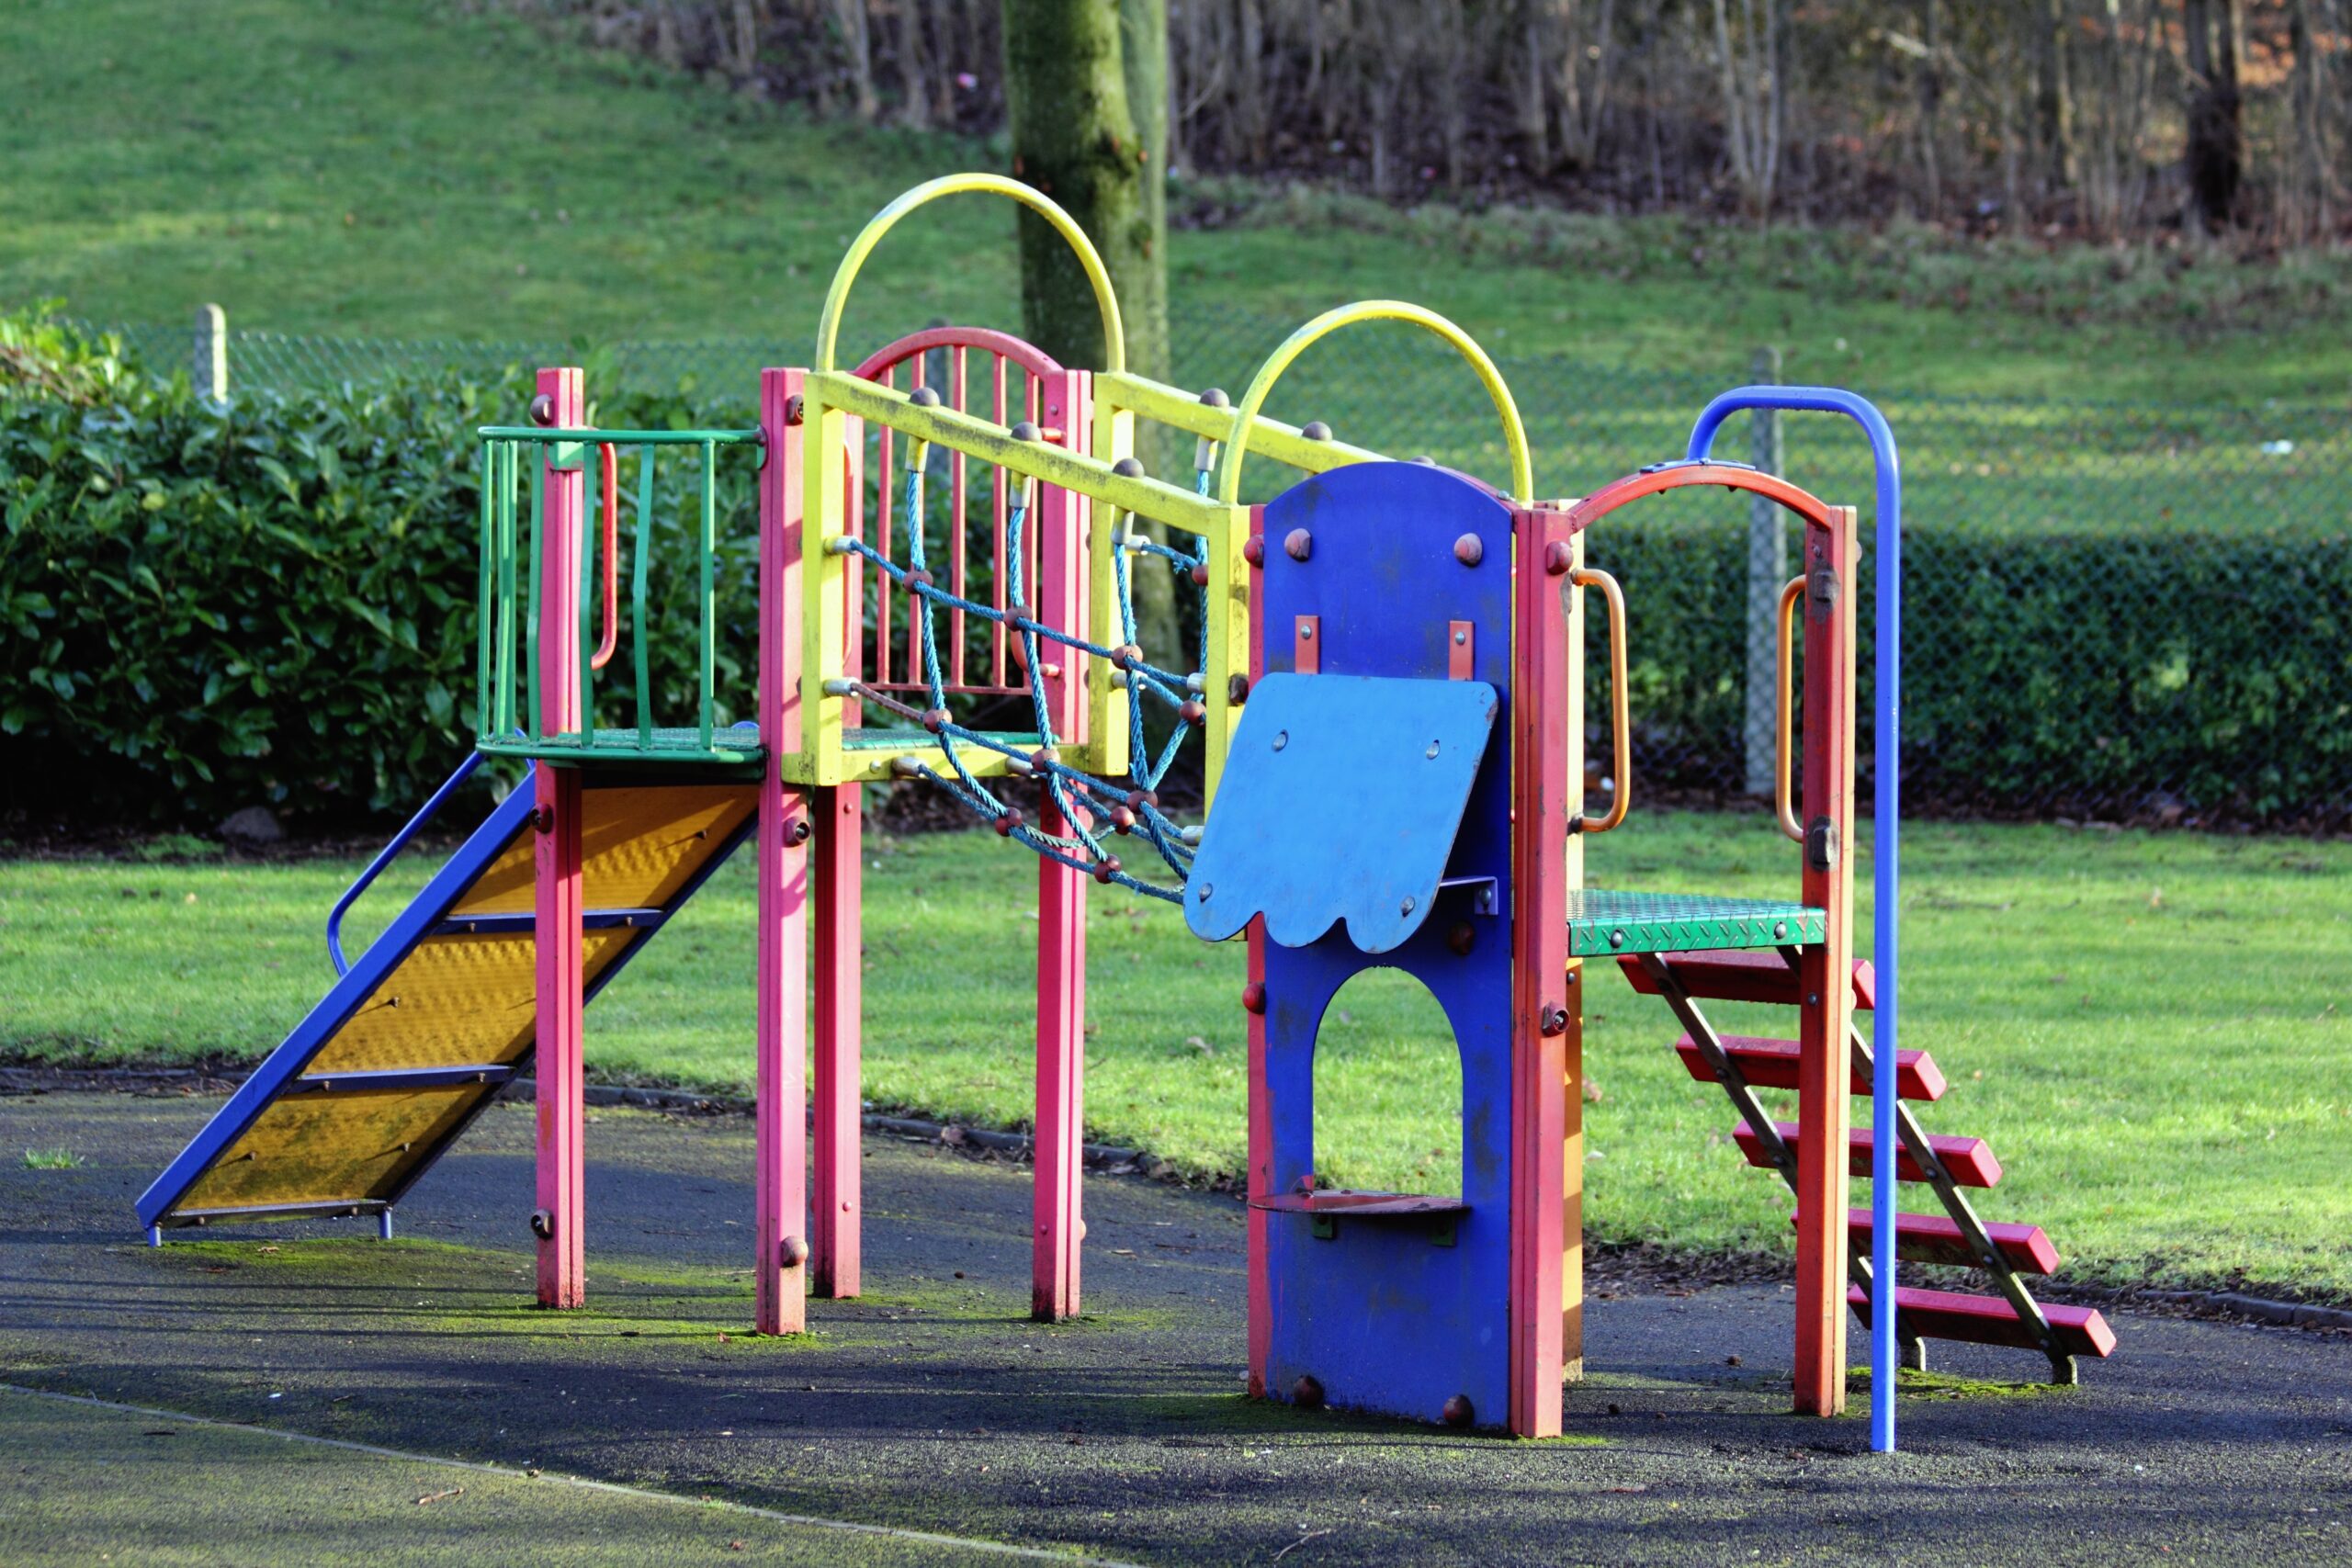 Accidents in the Playground – Not always fun and games